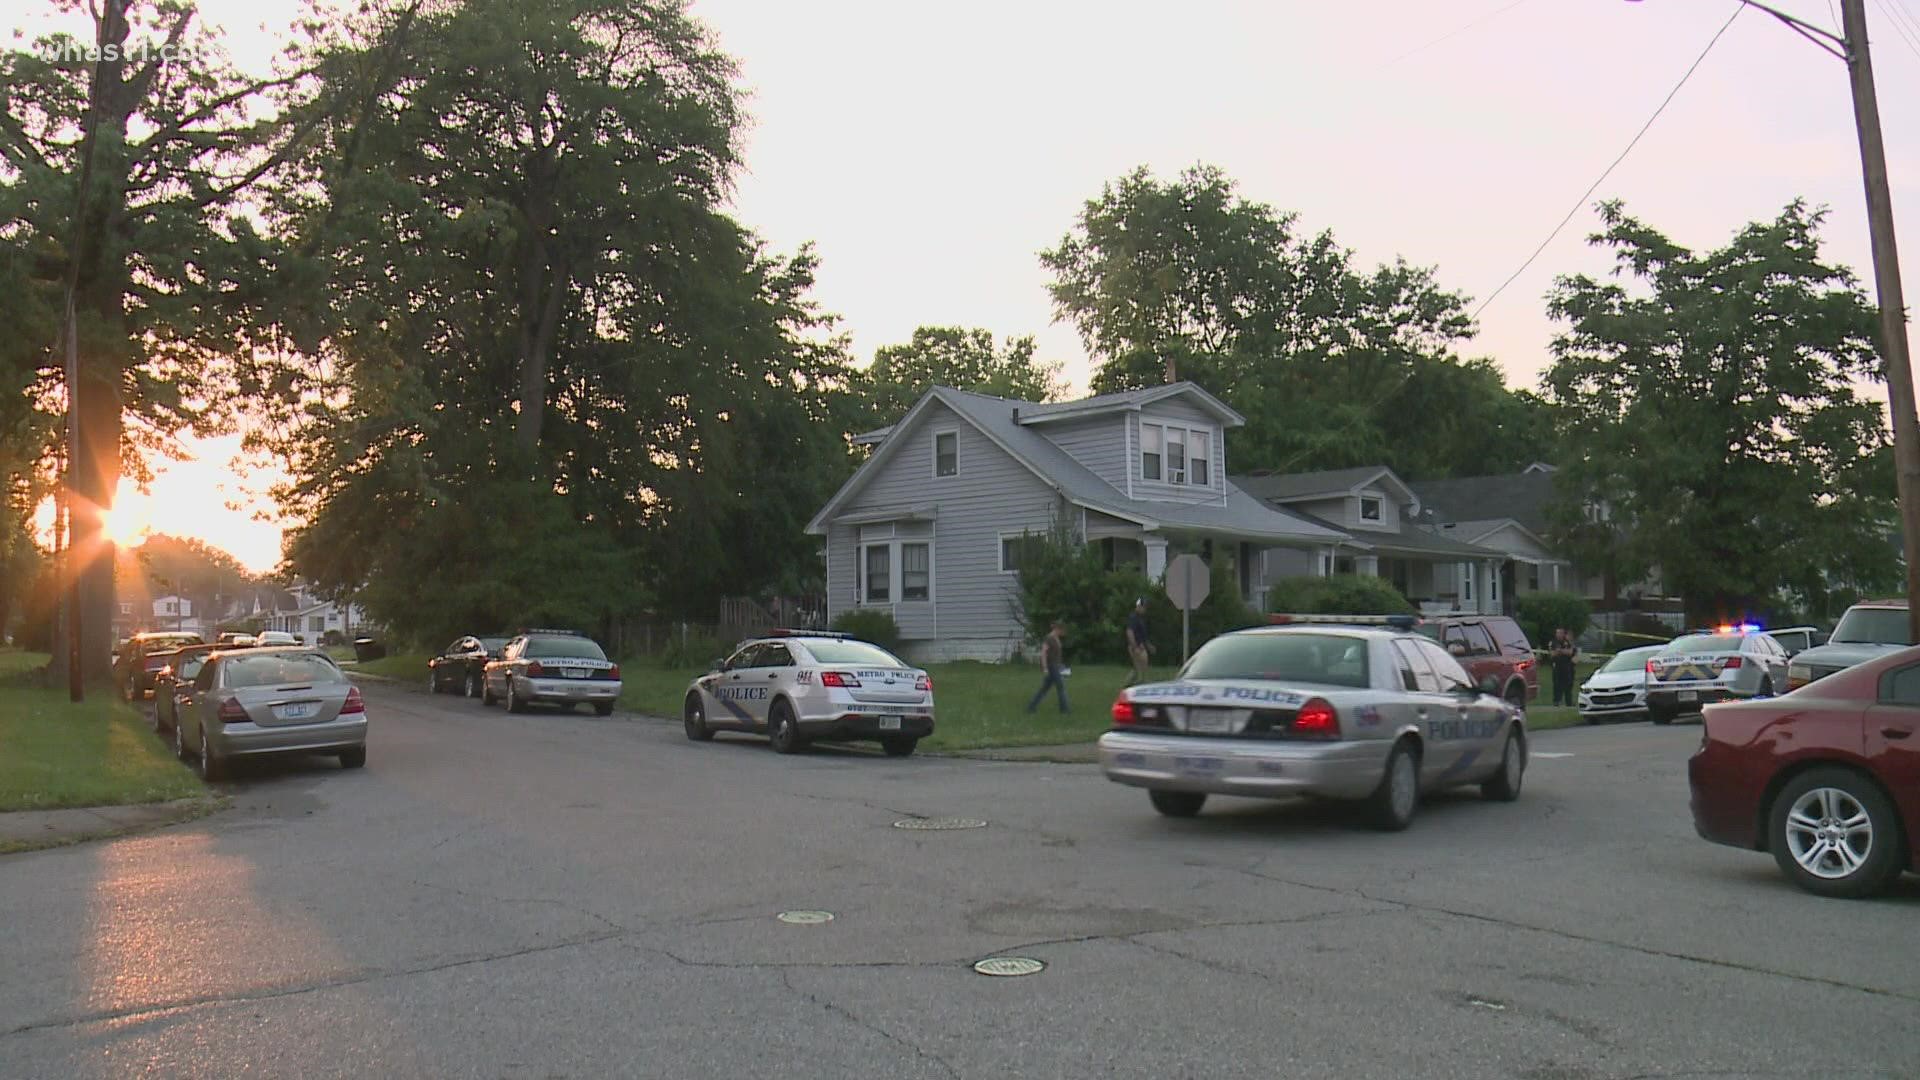 LMPD said officers responded to a call of a shooting at the 100 block of N. 40th Street in the Shawnee neighborhood.